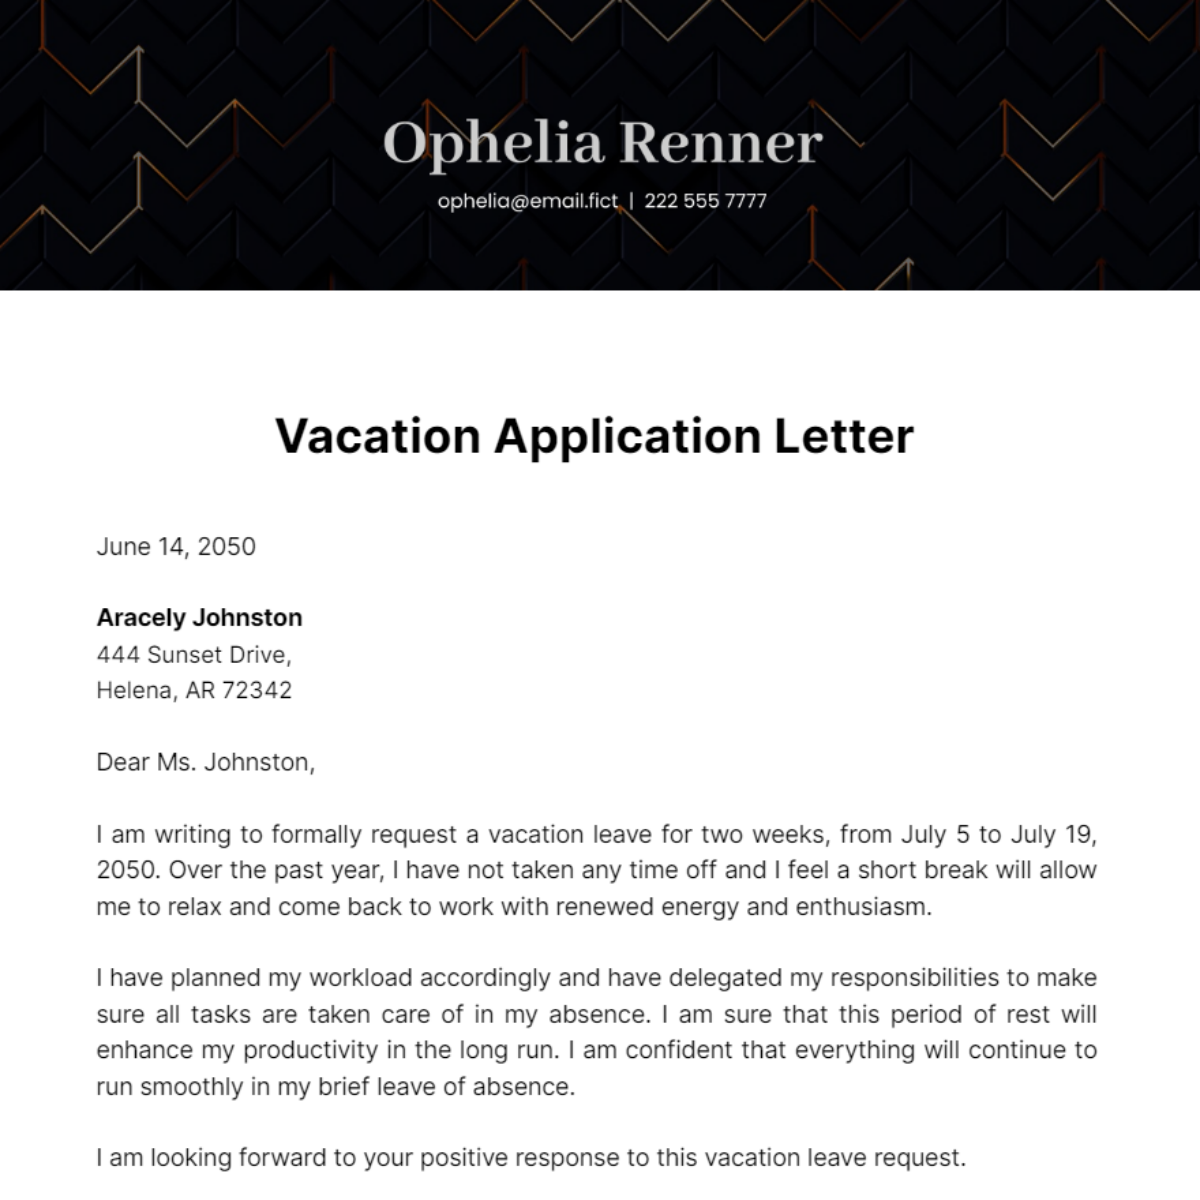 Vacation Application Letter Template